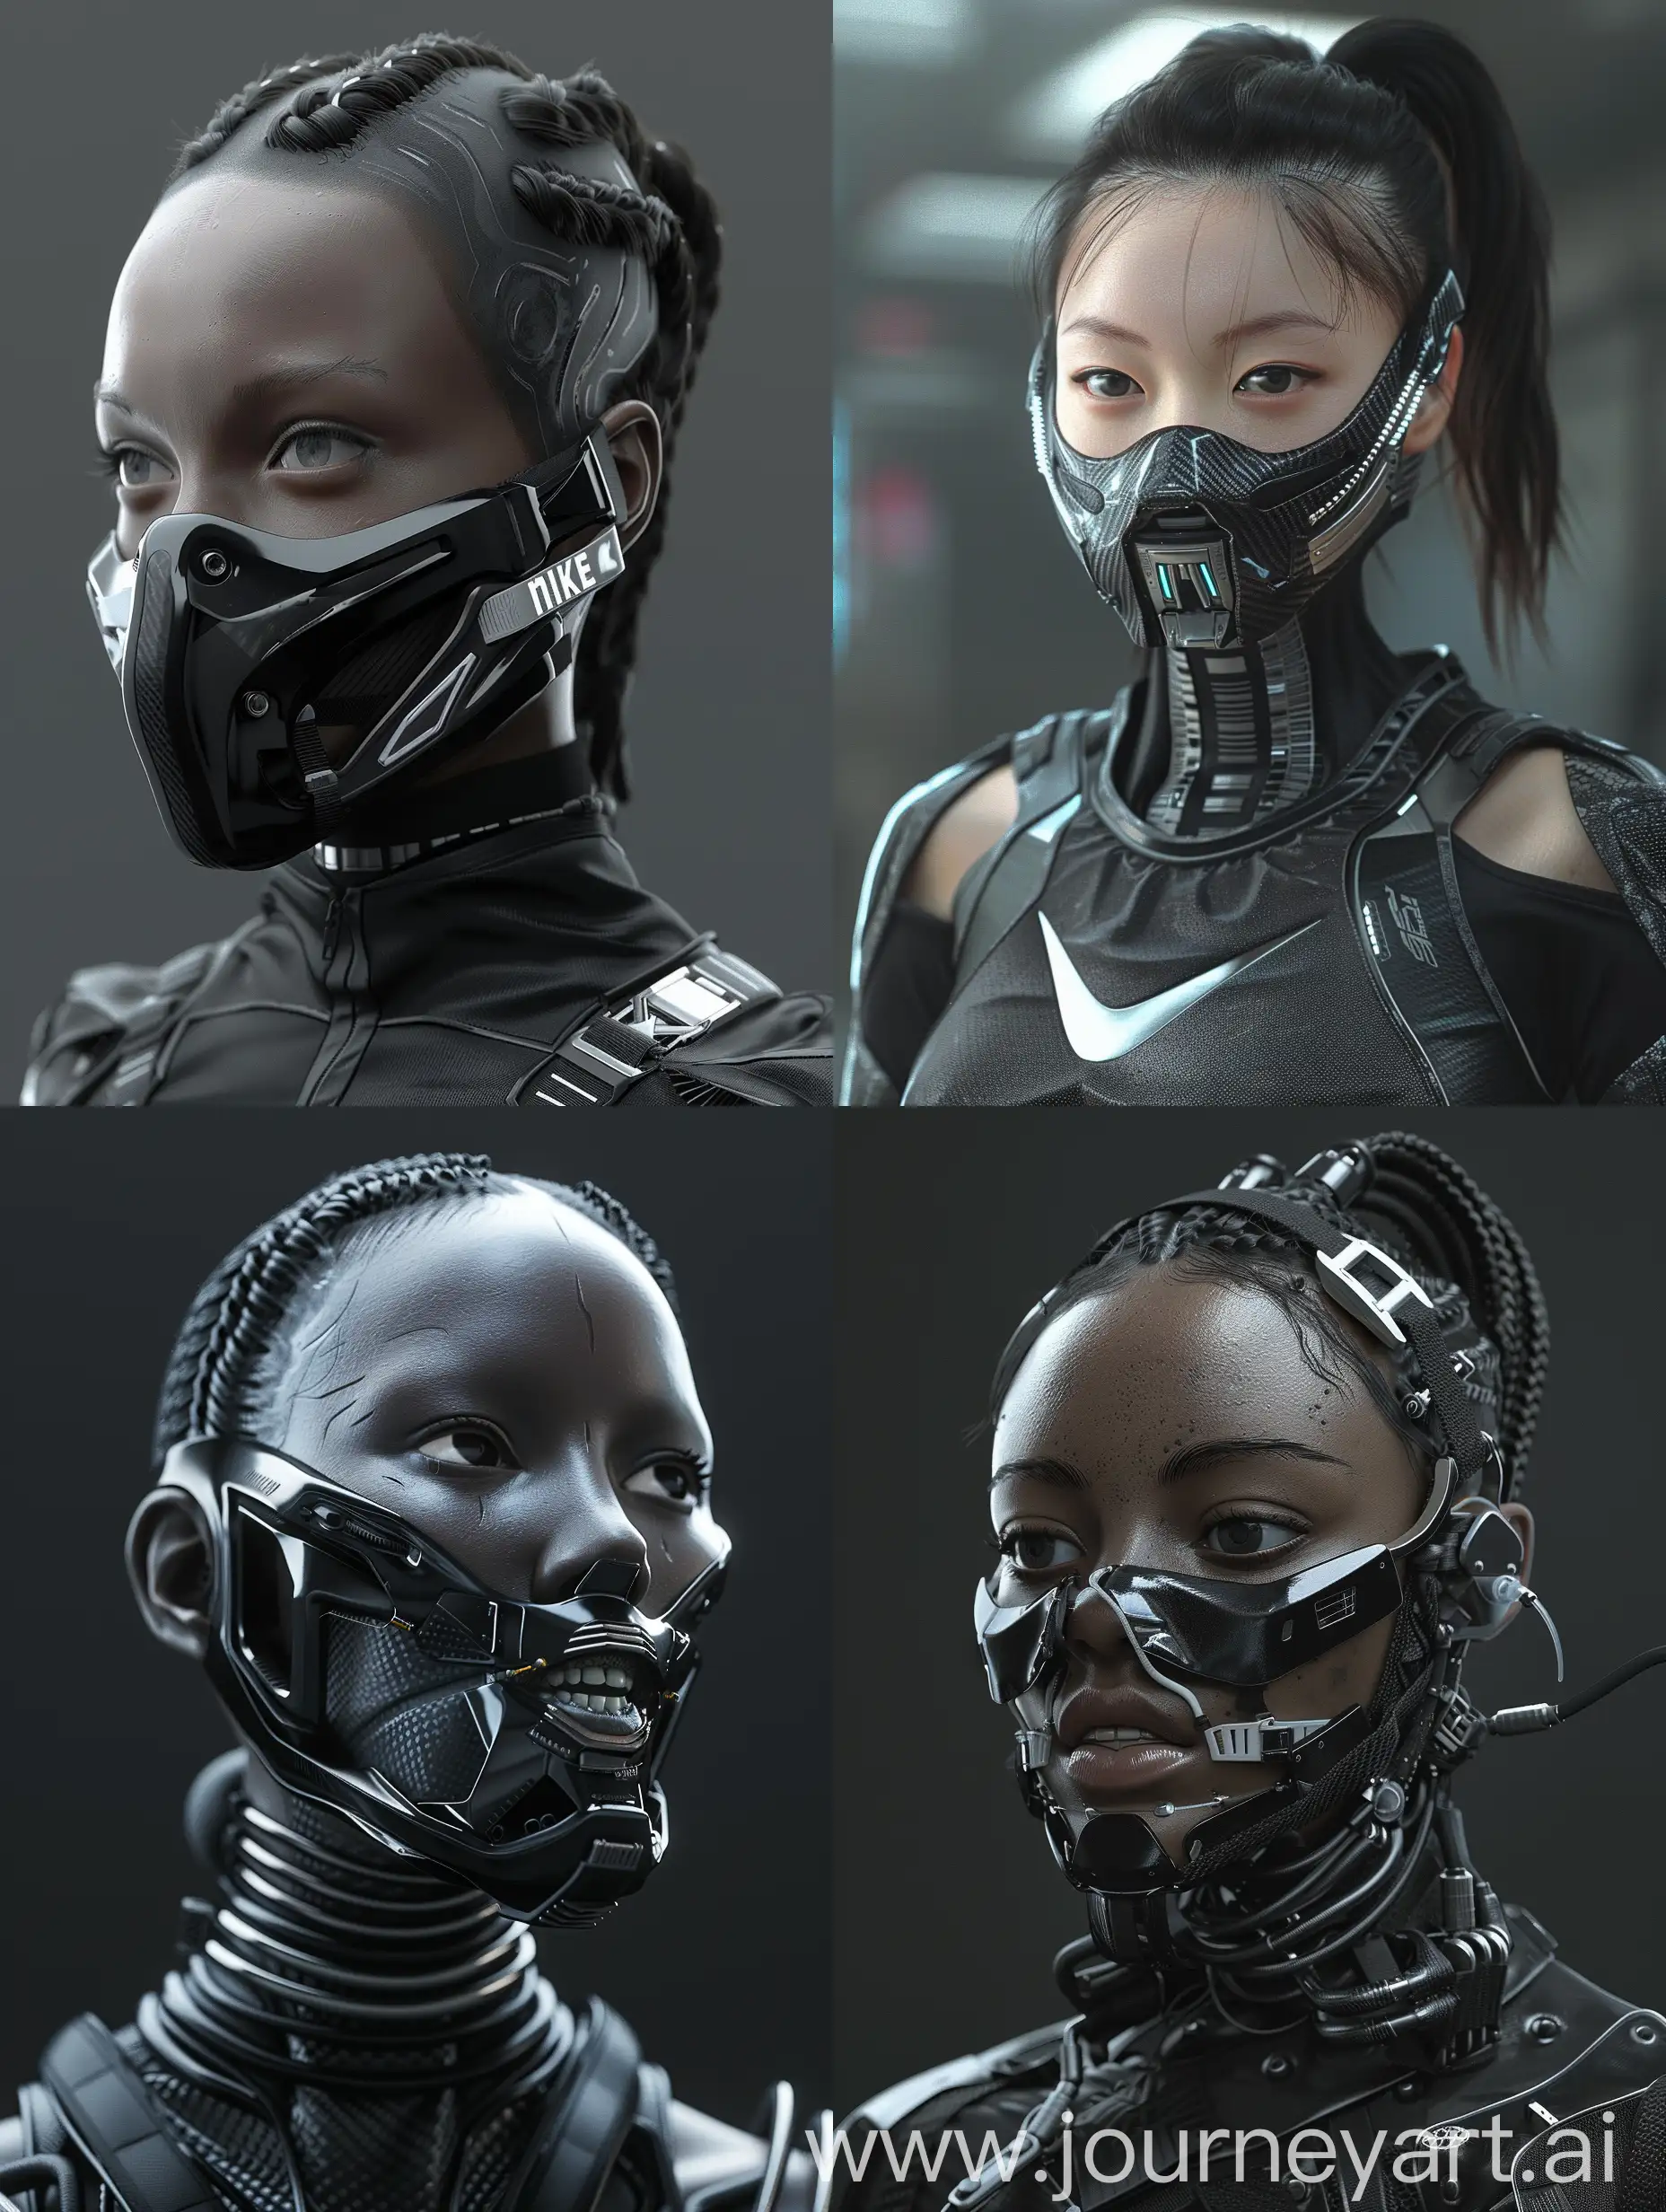 Black Background captivating character adorned with a cybernetic mouth-covering mask, seamlessly blending cutting-edge technology with intricate details such as carbon fiber textures and aluminum accents. This mask, designed to cover only the mouth, showcases the perfect fusion of advanced cybernetic enhancements with futuristic elegance. Symbolizing the delicate equilibrium between humanity and machine, her appearance embodies the essence of a futuristic cyberpunk aesthetic, nike addons, no blur